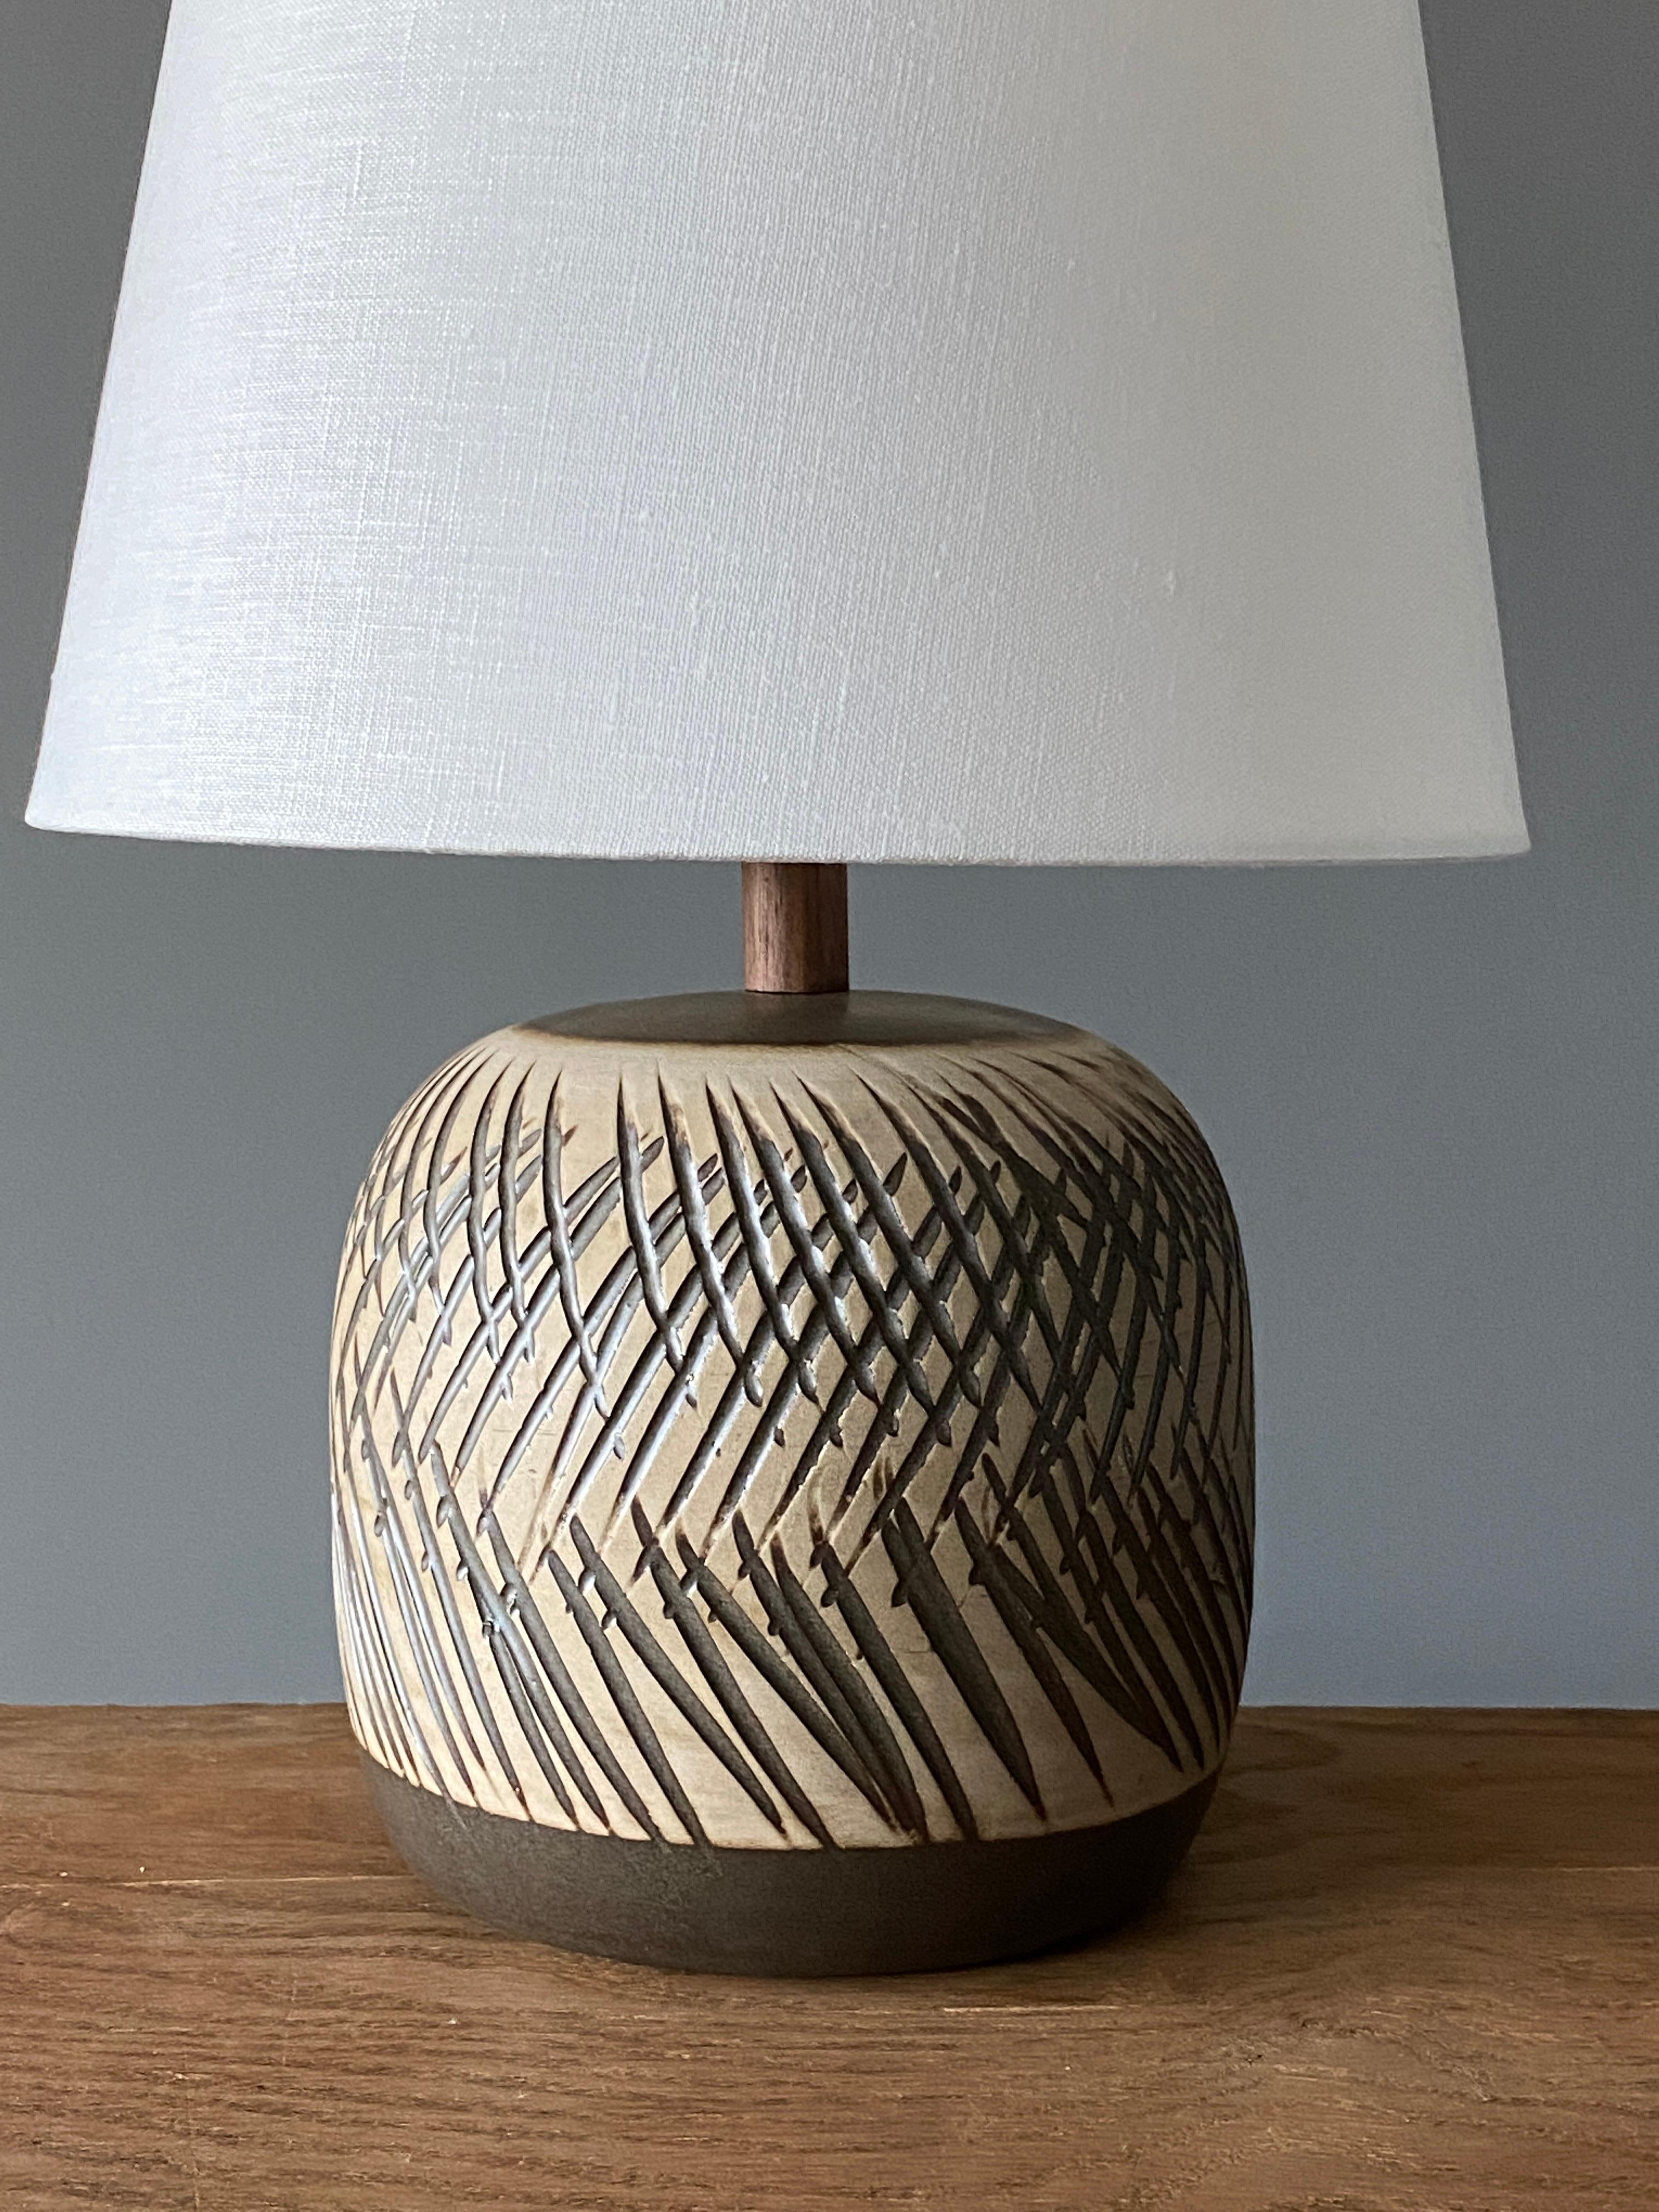 A table lamp designed by husband and wife duo Jane & Gordon Martz. Produced by Marshall Studios, Indianapolis. 

The base is slip-cast and then dipped into glaze and hand painted. Design also incorporates exquisite walnut neck and finial. Base is